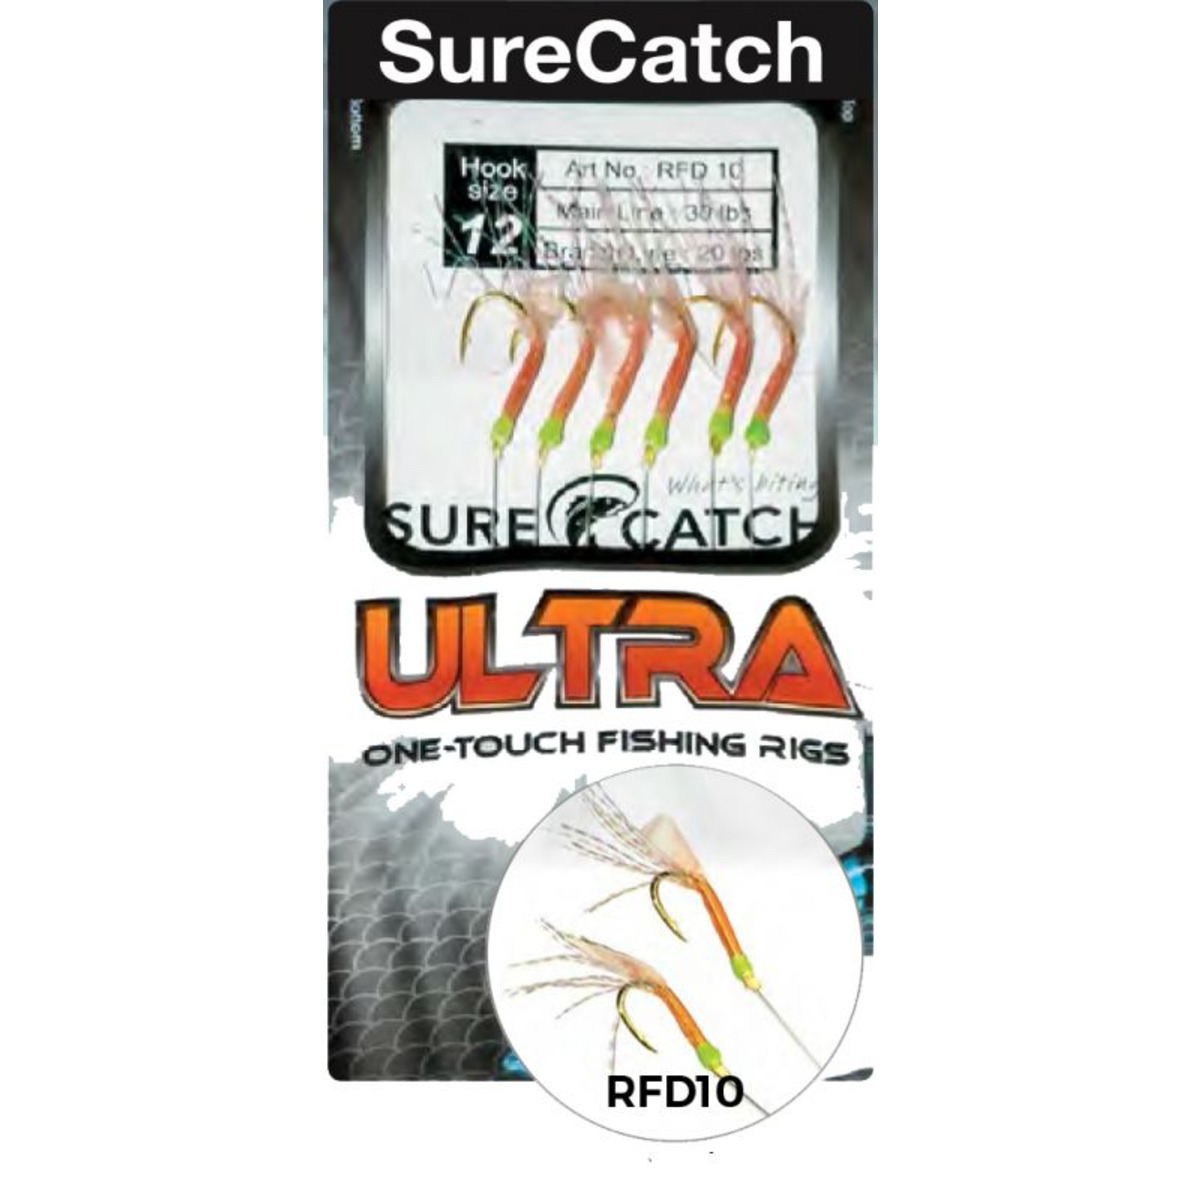 Surecatch Ultra One-touch Fishing Rigs Rfd10 - #6